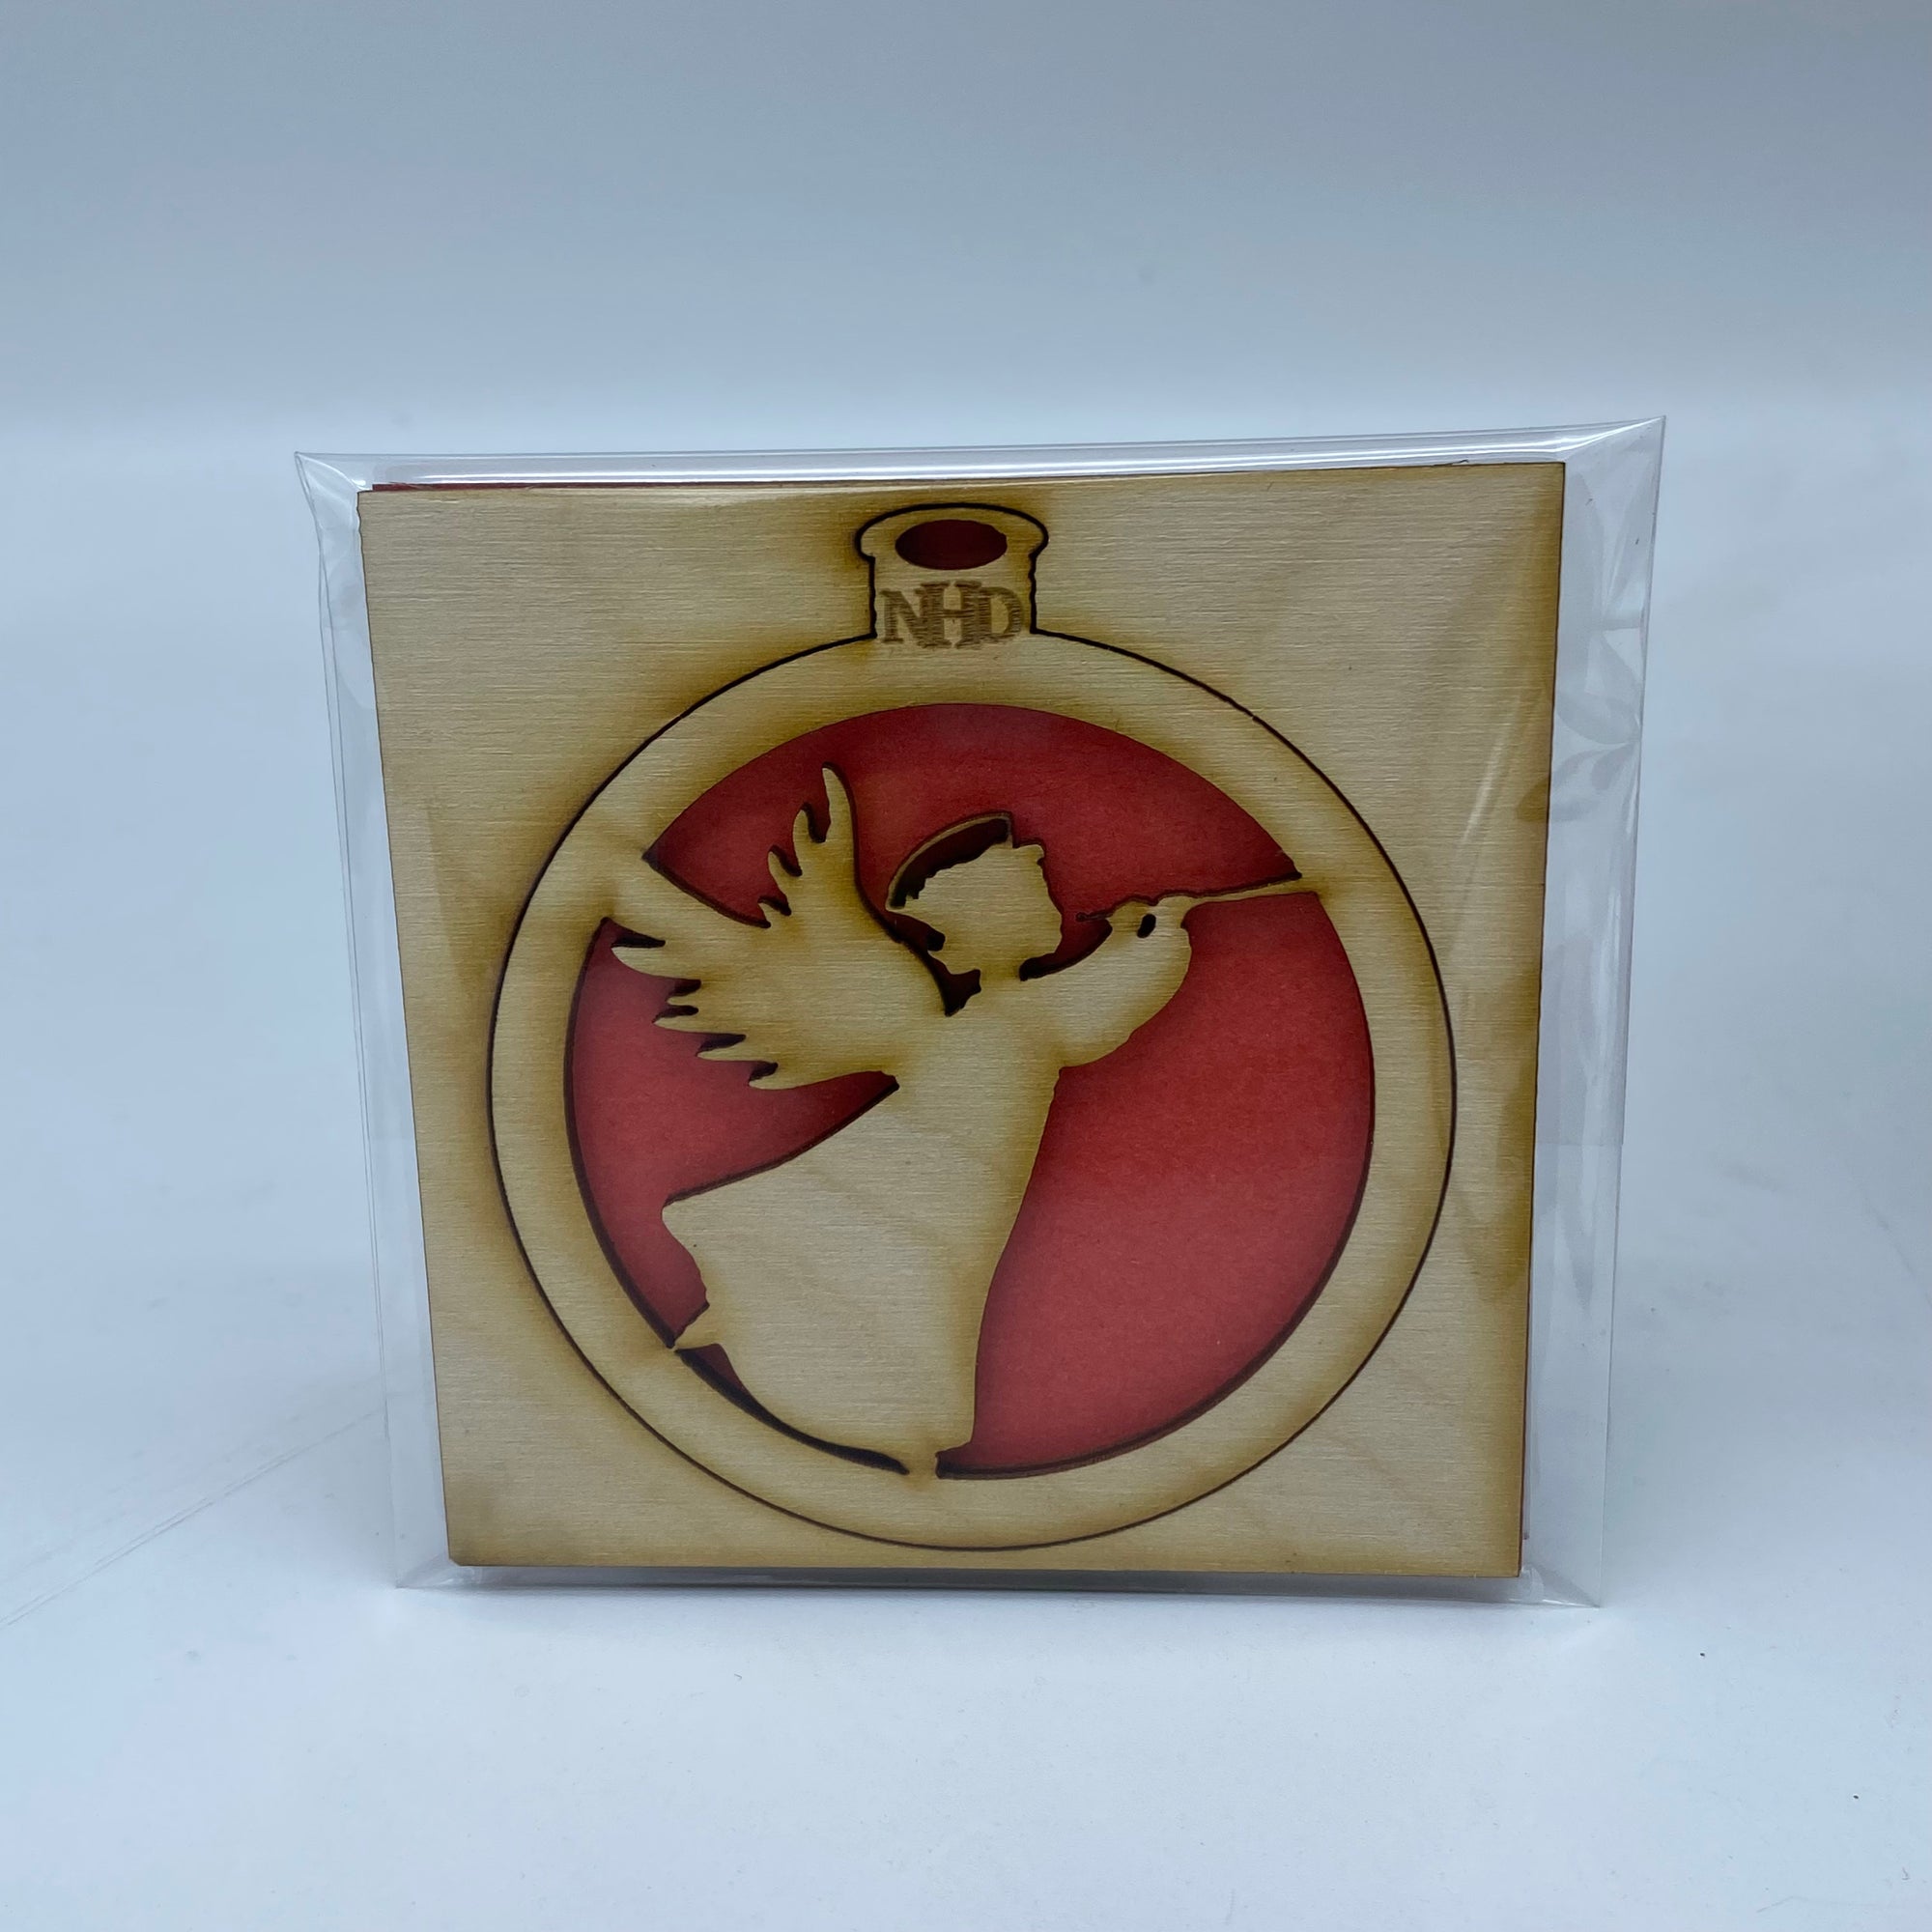 Angel and trumpet ornament